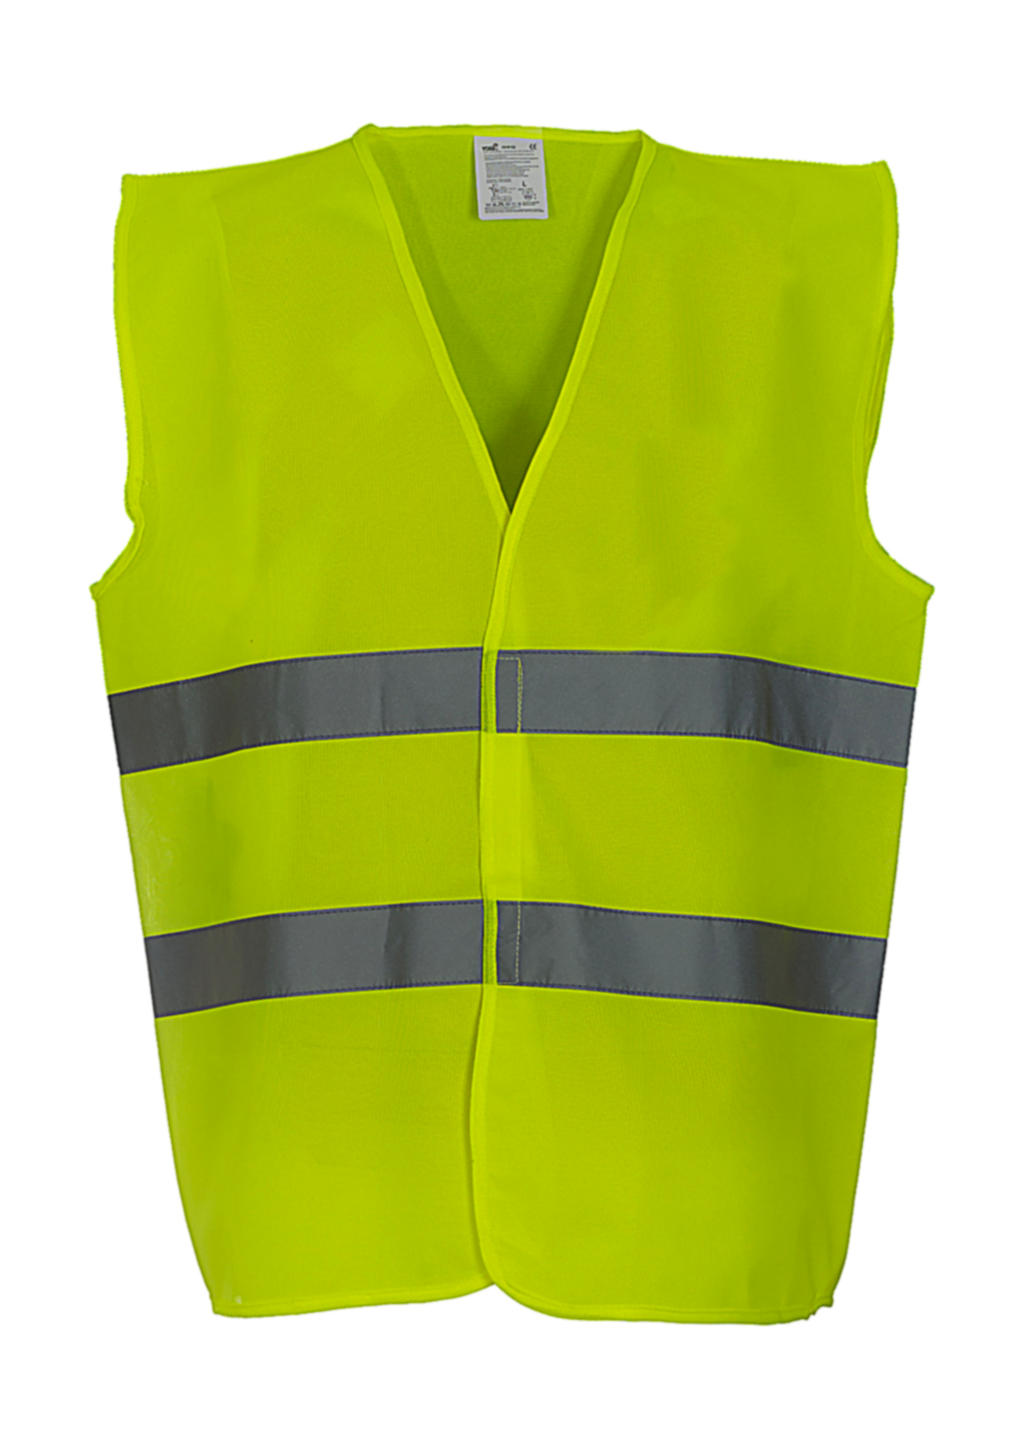  Fluo 2 Bands Waistcoat in Farbe Fluo Yellow